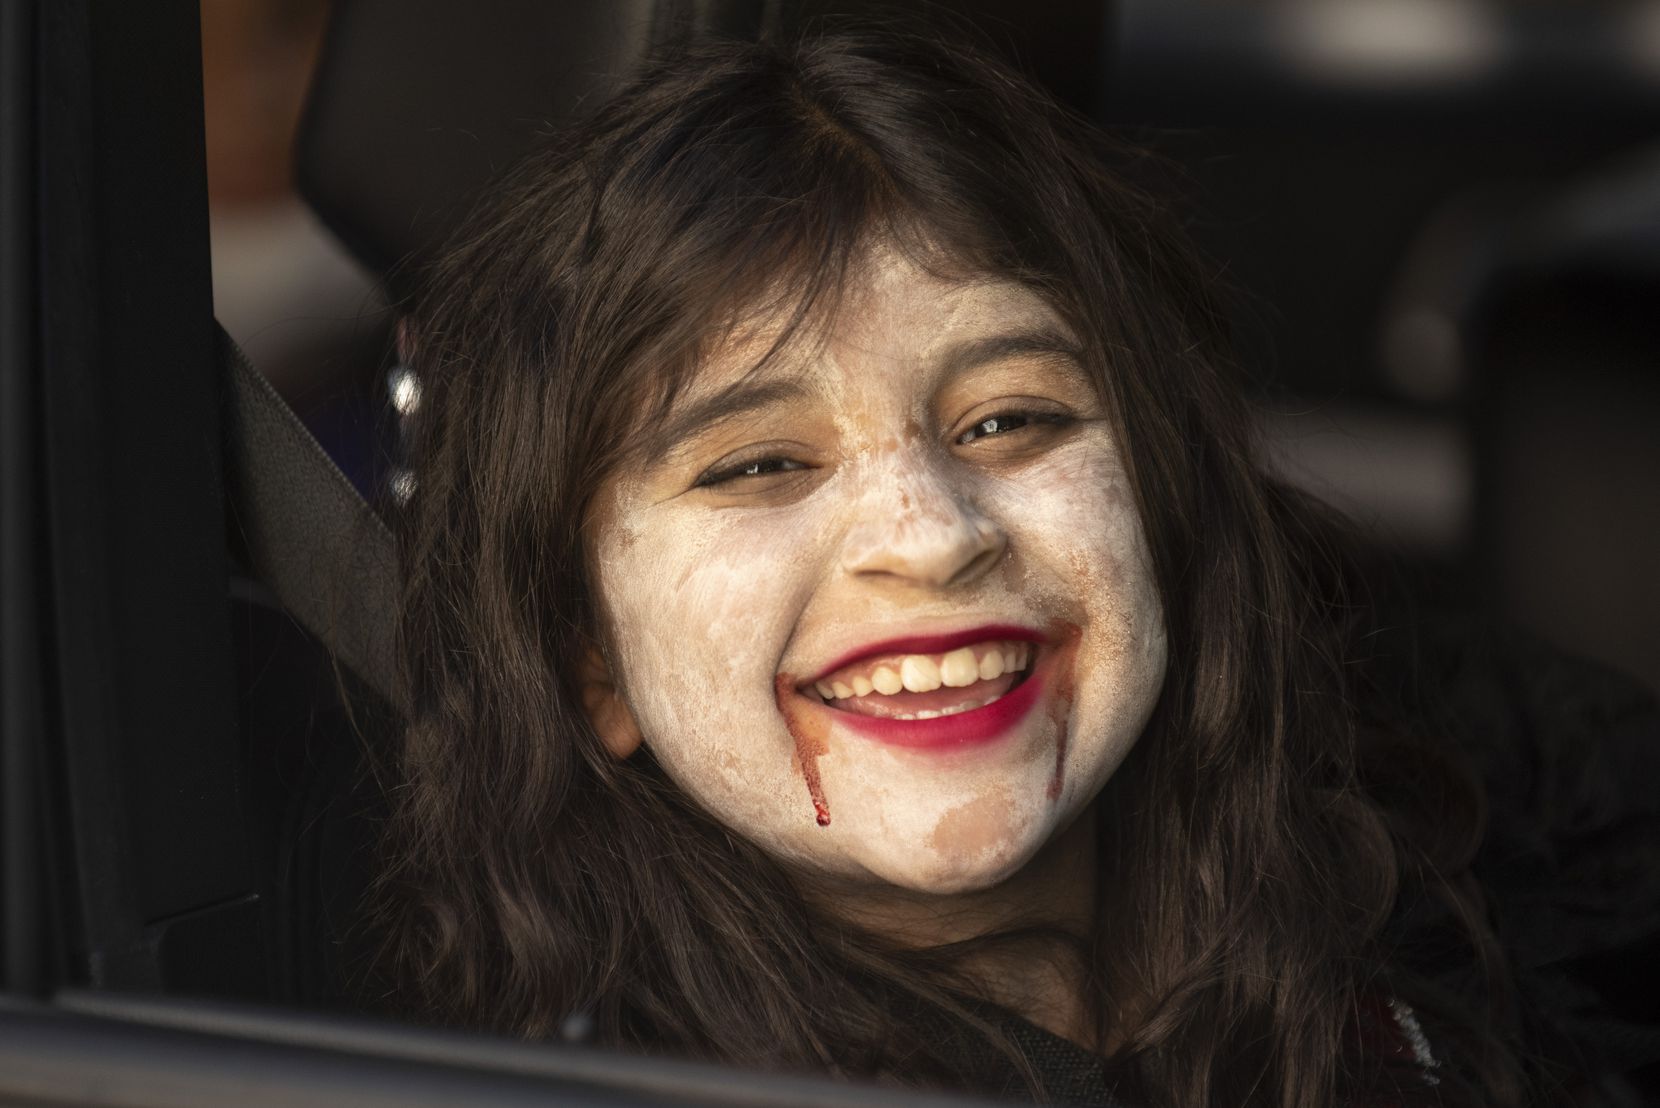 Victoria Rodriguez, 8, dressed as a young vampire, giggles as her family drives through the contactless Candy Caravan event hosted by The City of Dallas at Dallas Heritage Village, on Saturday, Oct. 31, 2020.